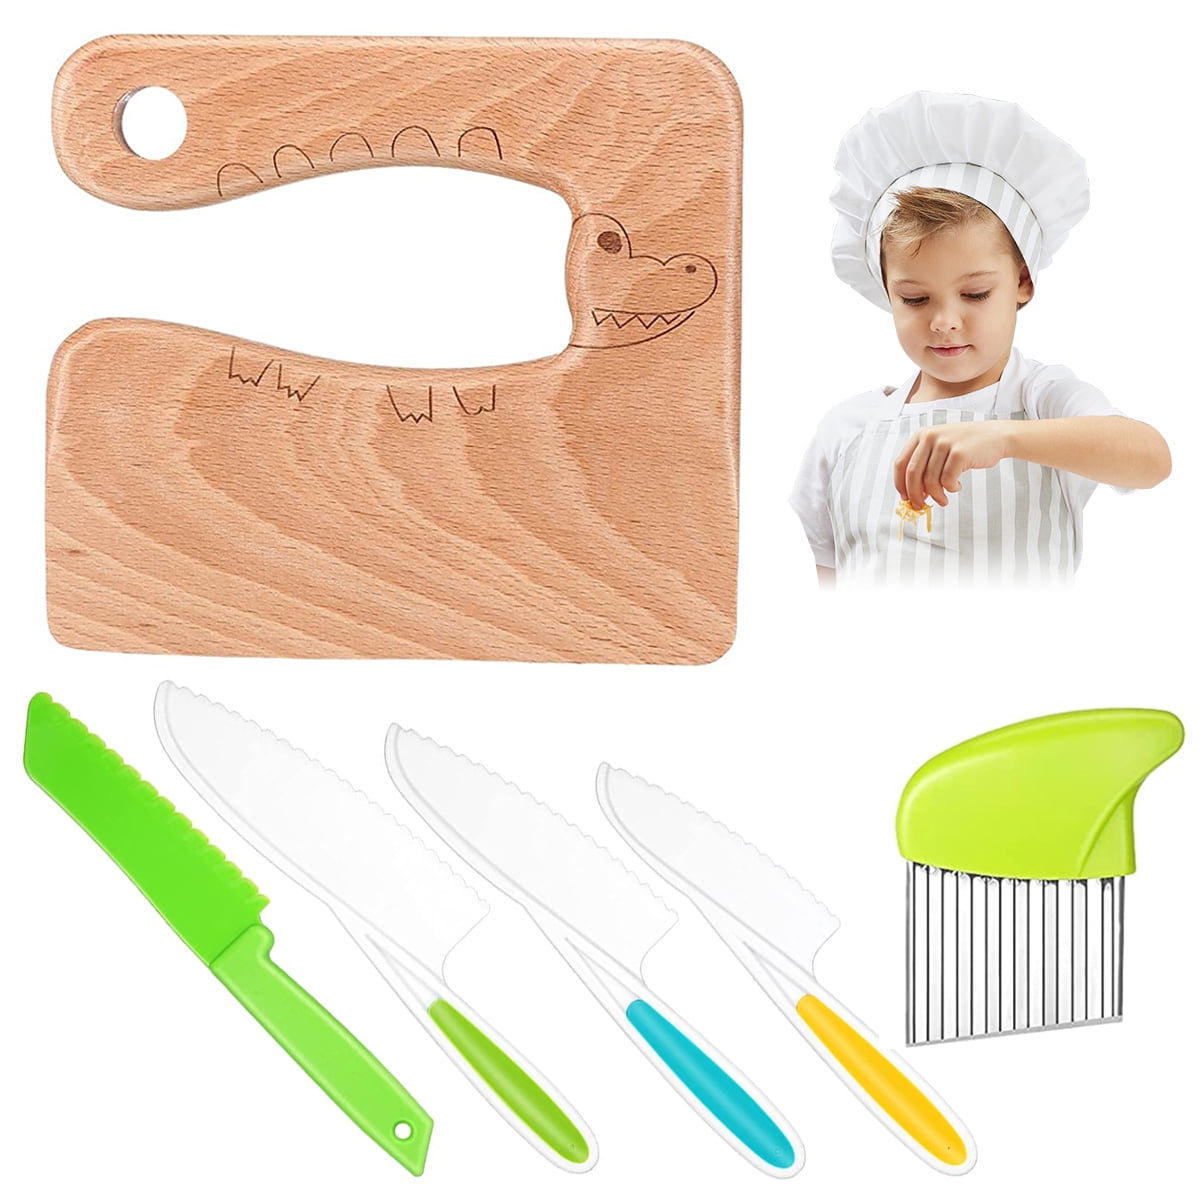 Food kids chopper safe firewood kids knife toddler knife - 34777 from  WoodpeckerForKids with donate to u24